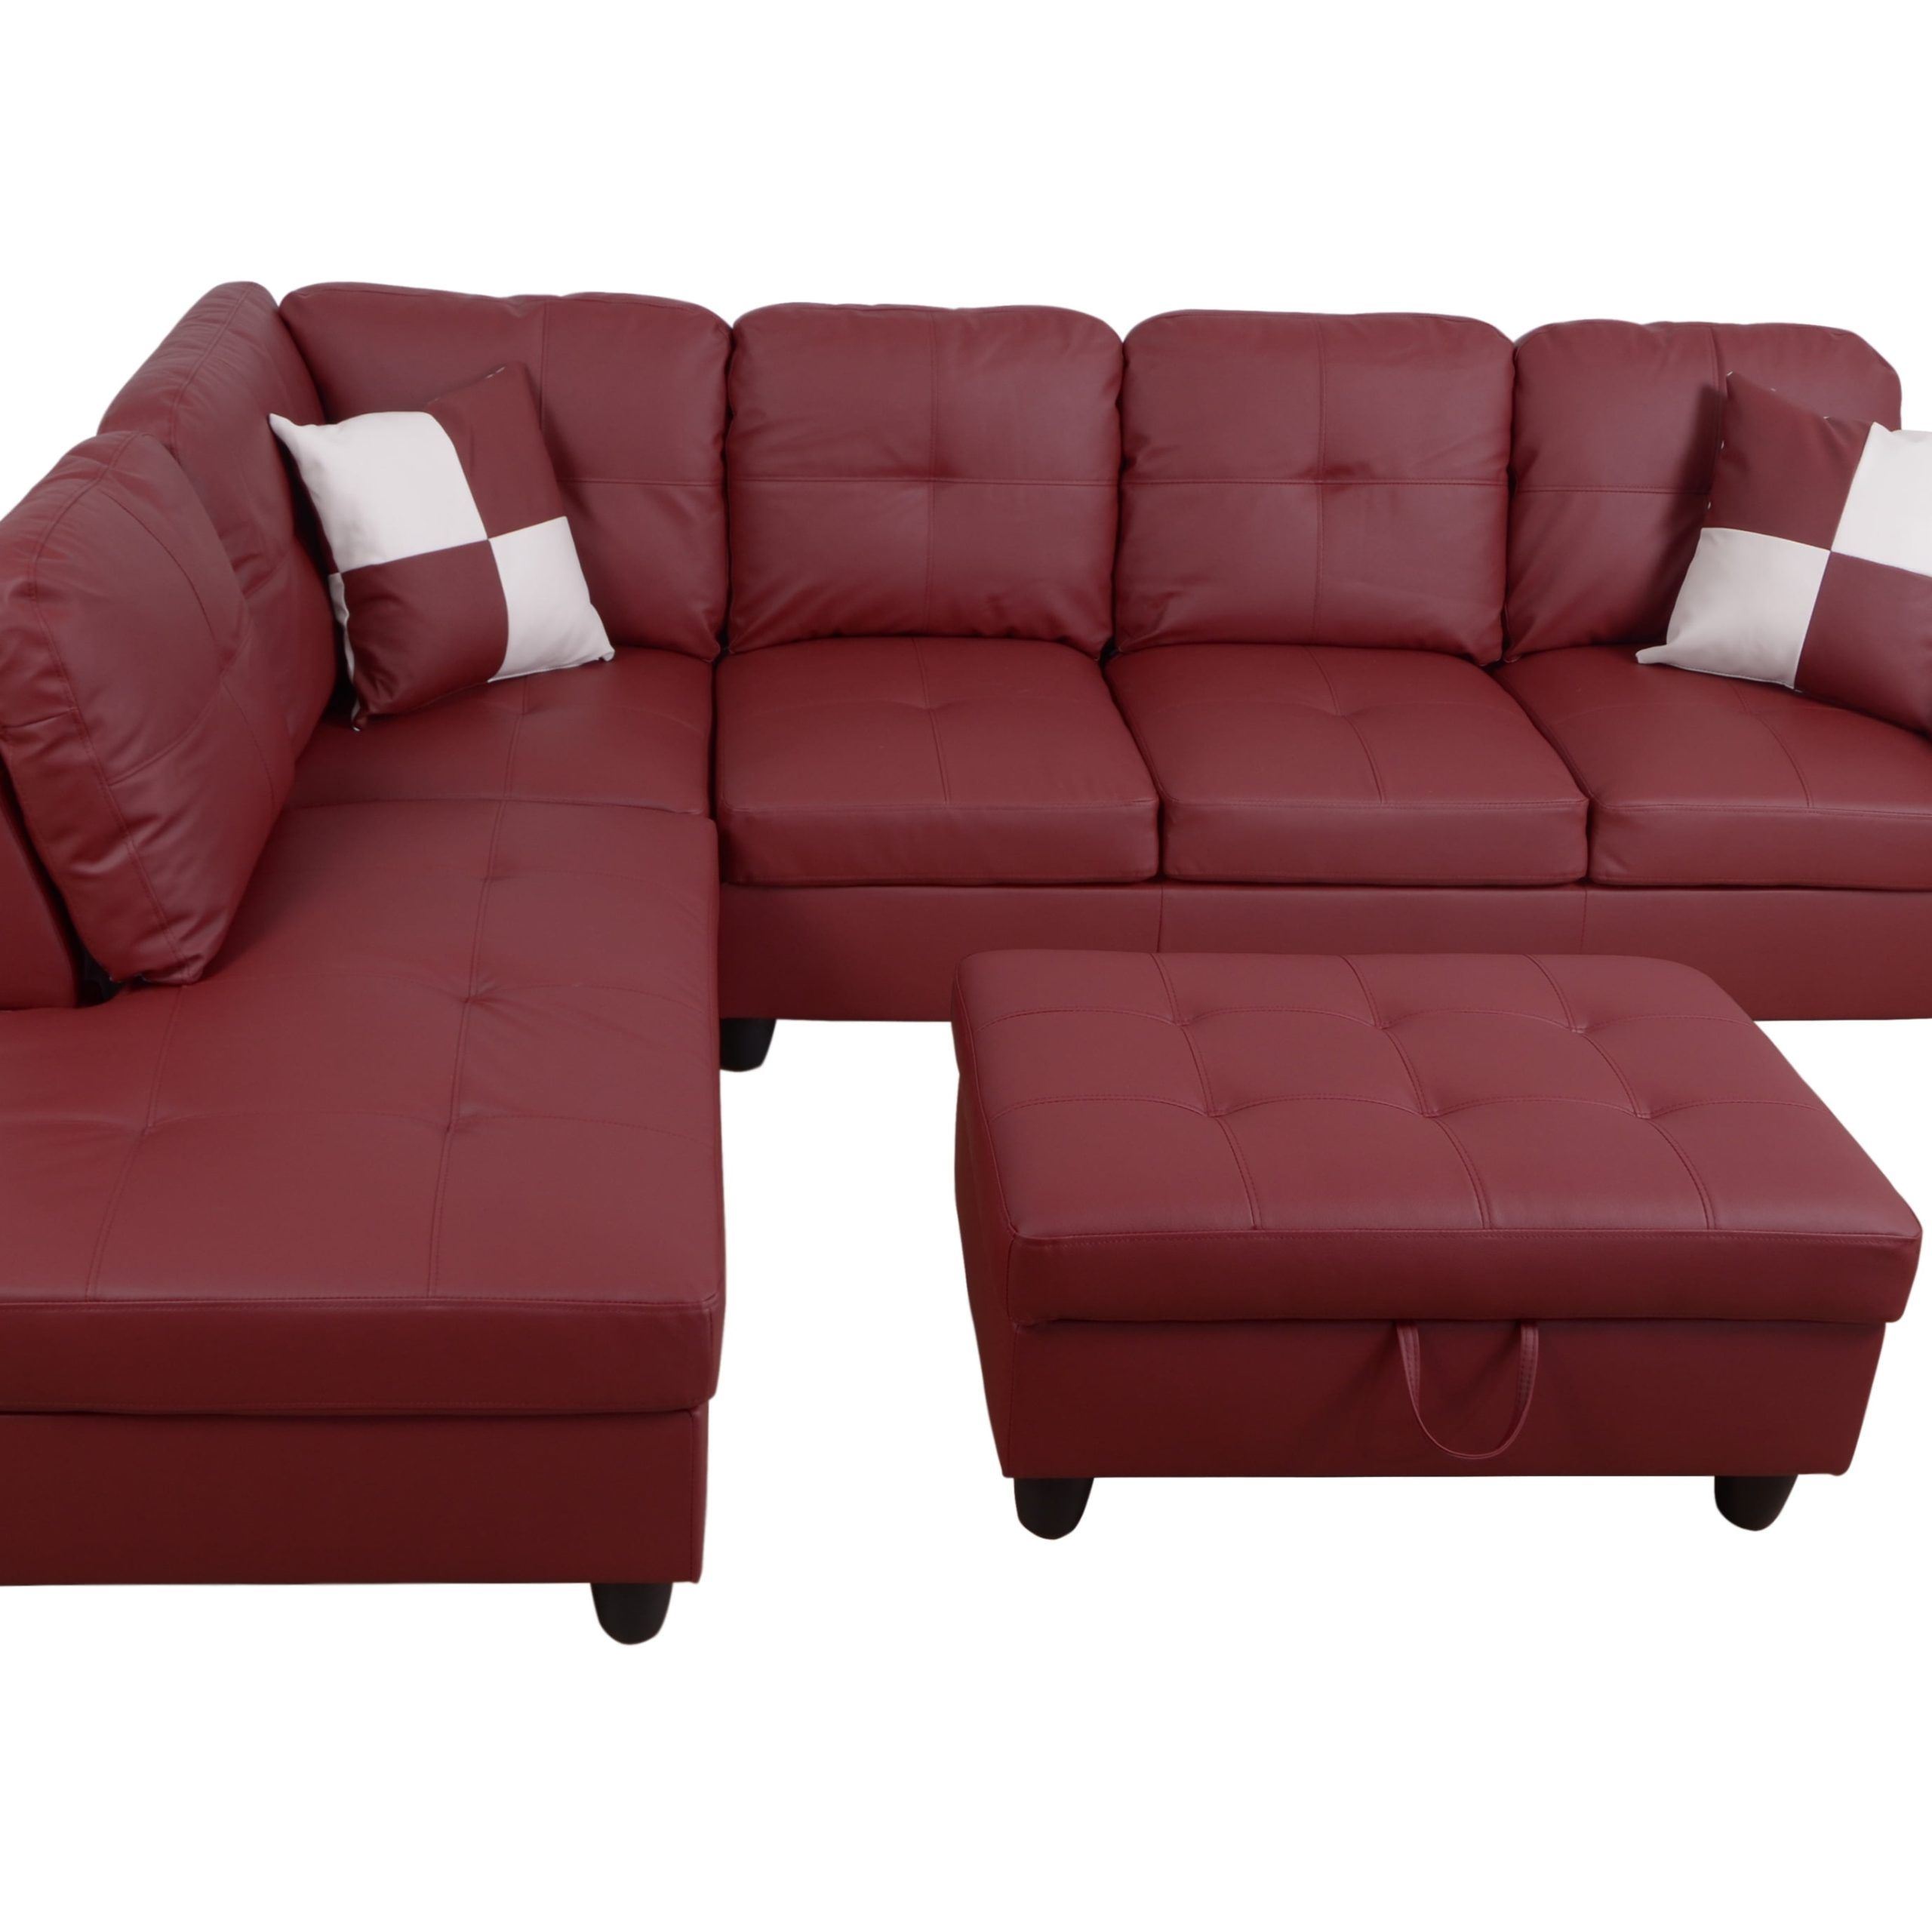 For U Furnishing Classic Red Faux Leather Sectional Sofa, Right Facing Within Faux Leather Sectional Sofa Sets (View 10 of 20)